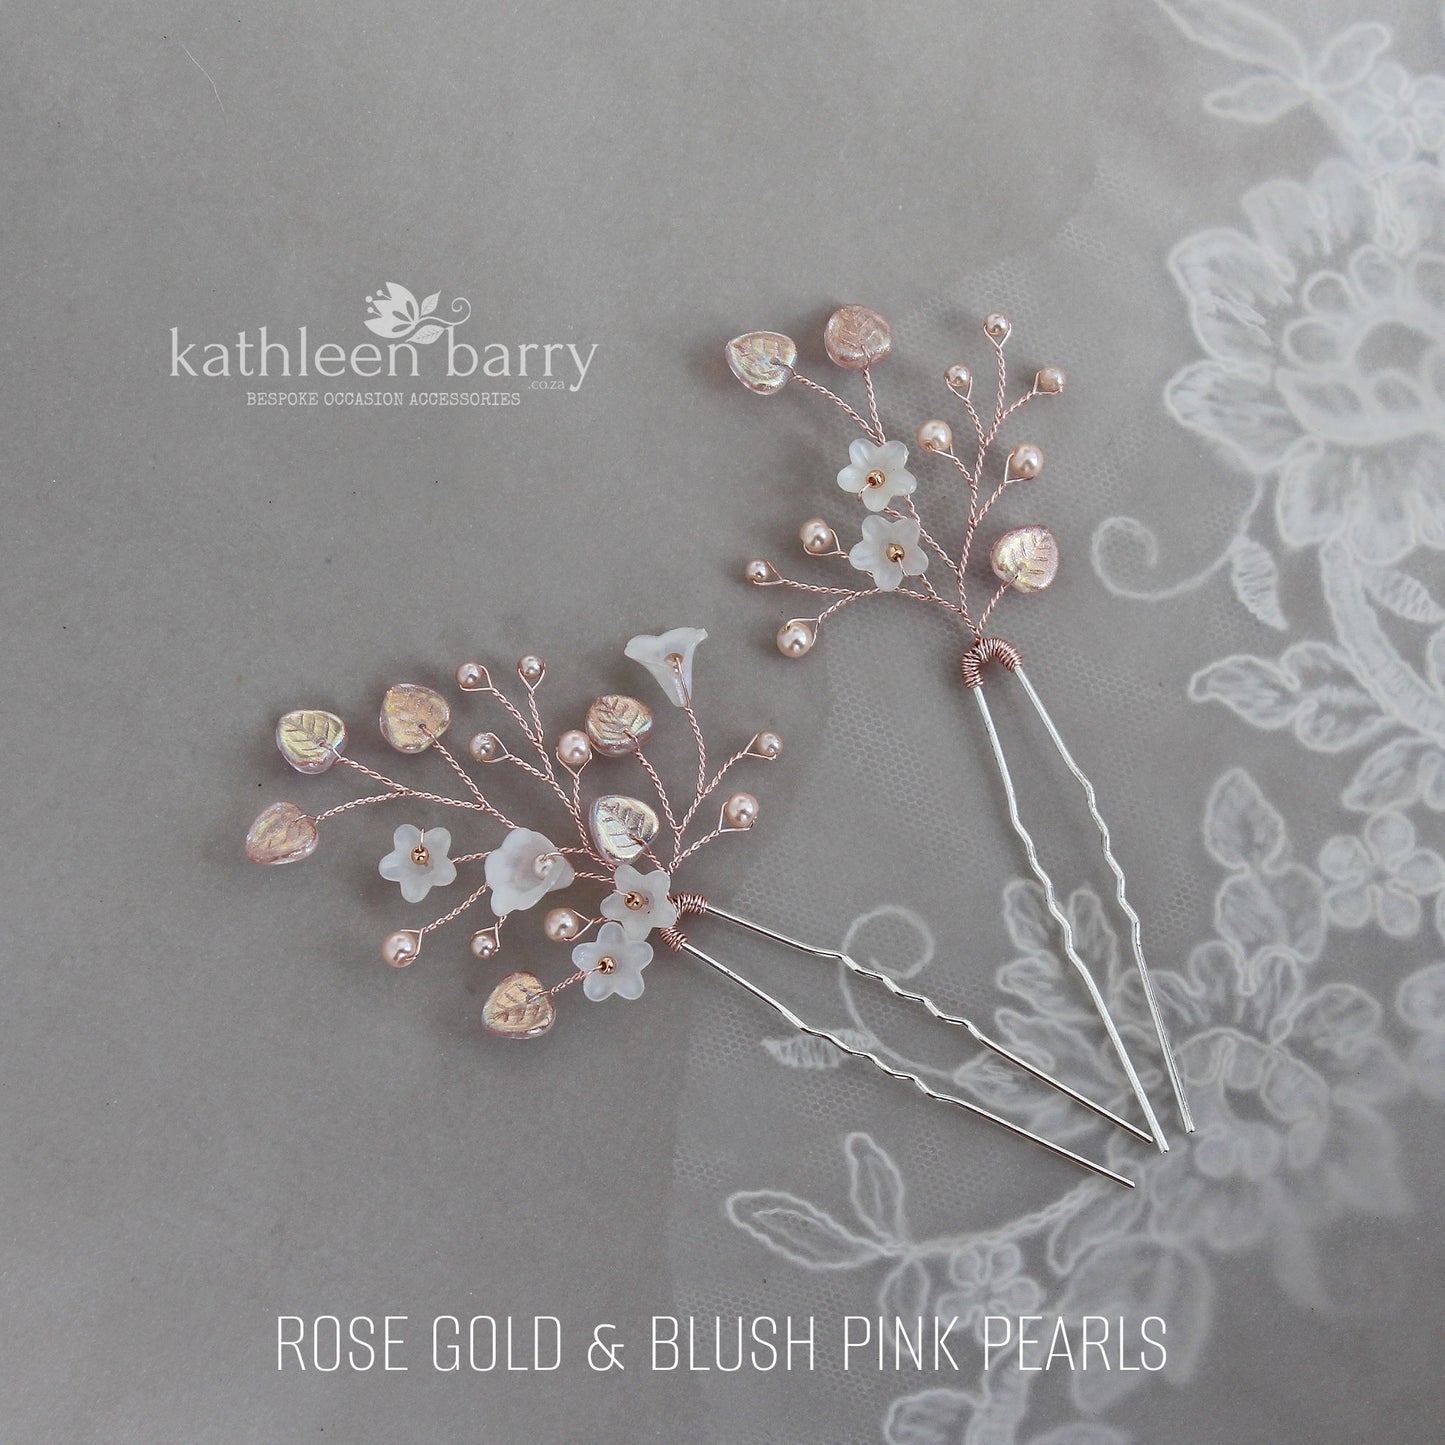 Eden pearly Hair pins - Available in Silver, gold & Rose gold - Sold individually